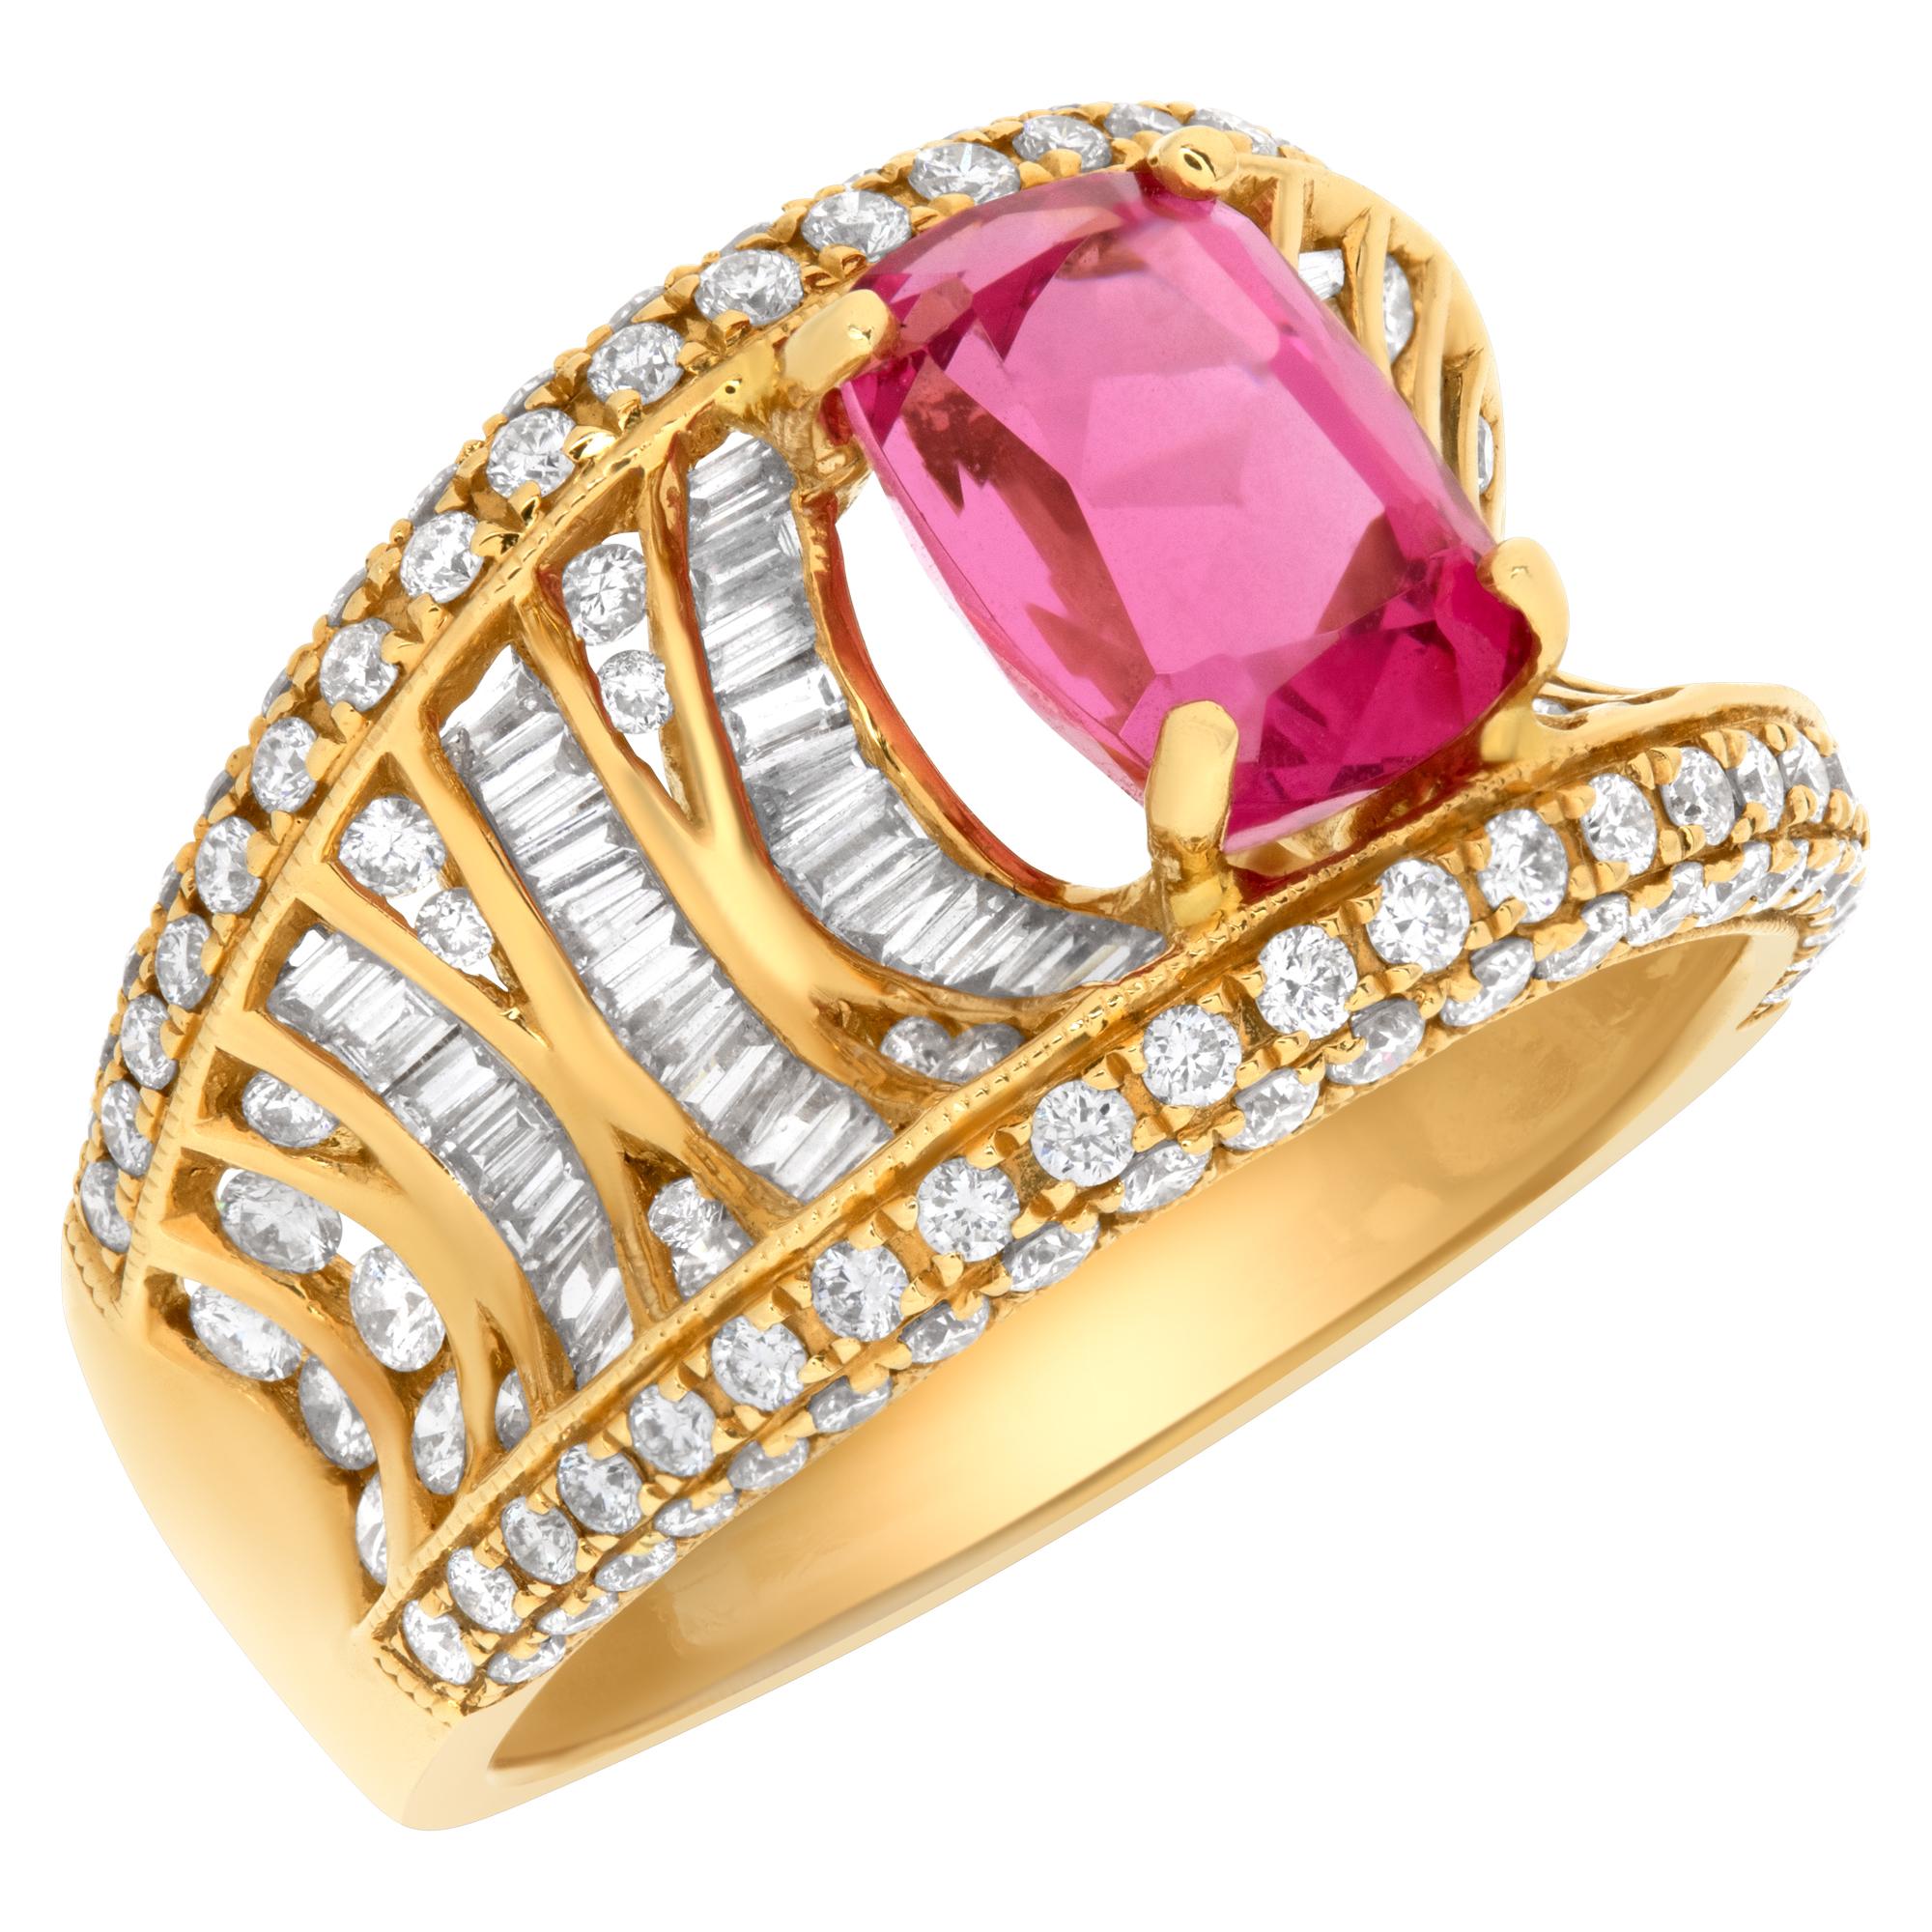 18k yellow gold ring with Oval brilliant cut pink spinel (2.73 carats) & diamond In Excellent Condition For Sale In Surfside, FL